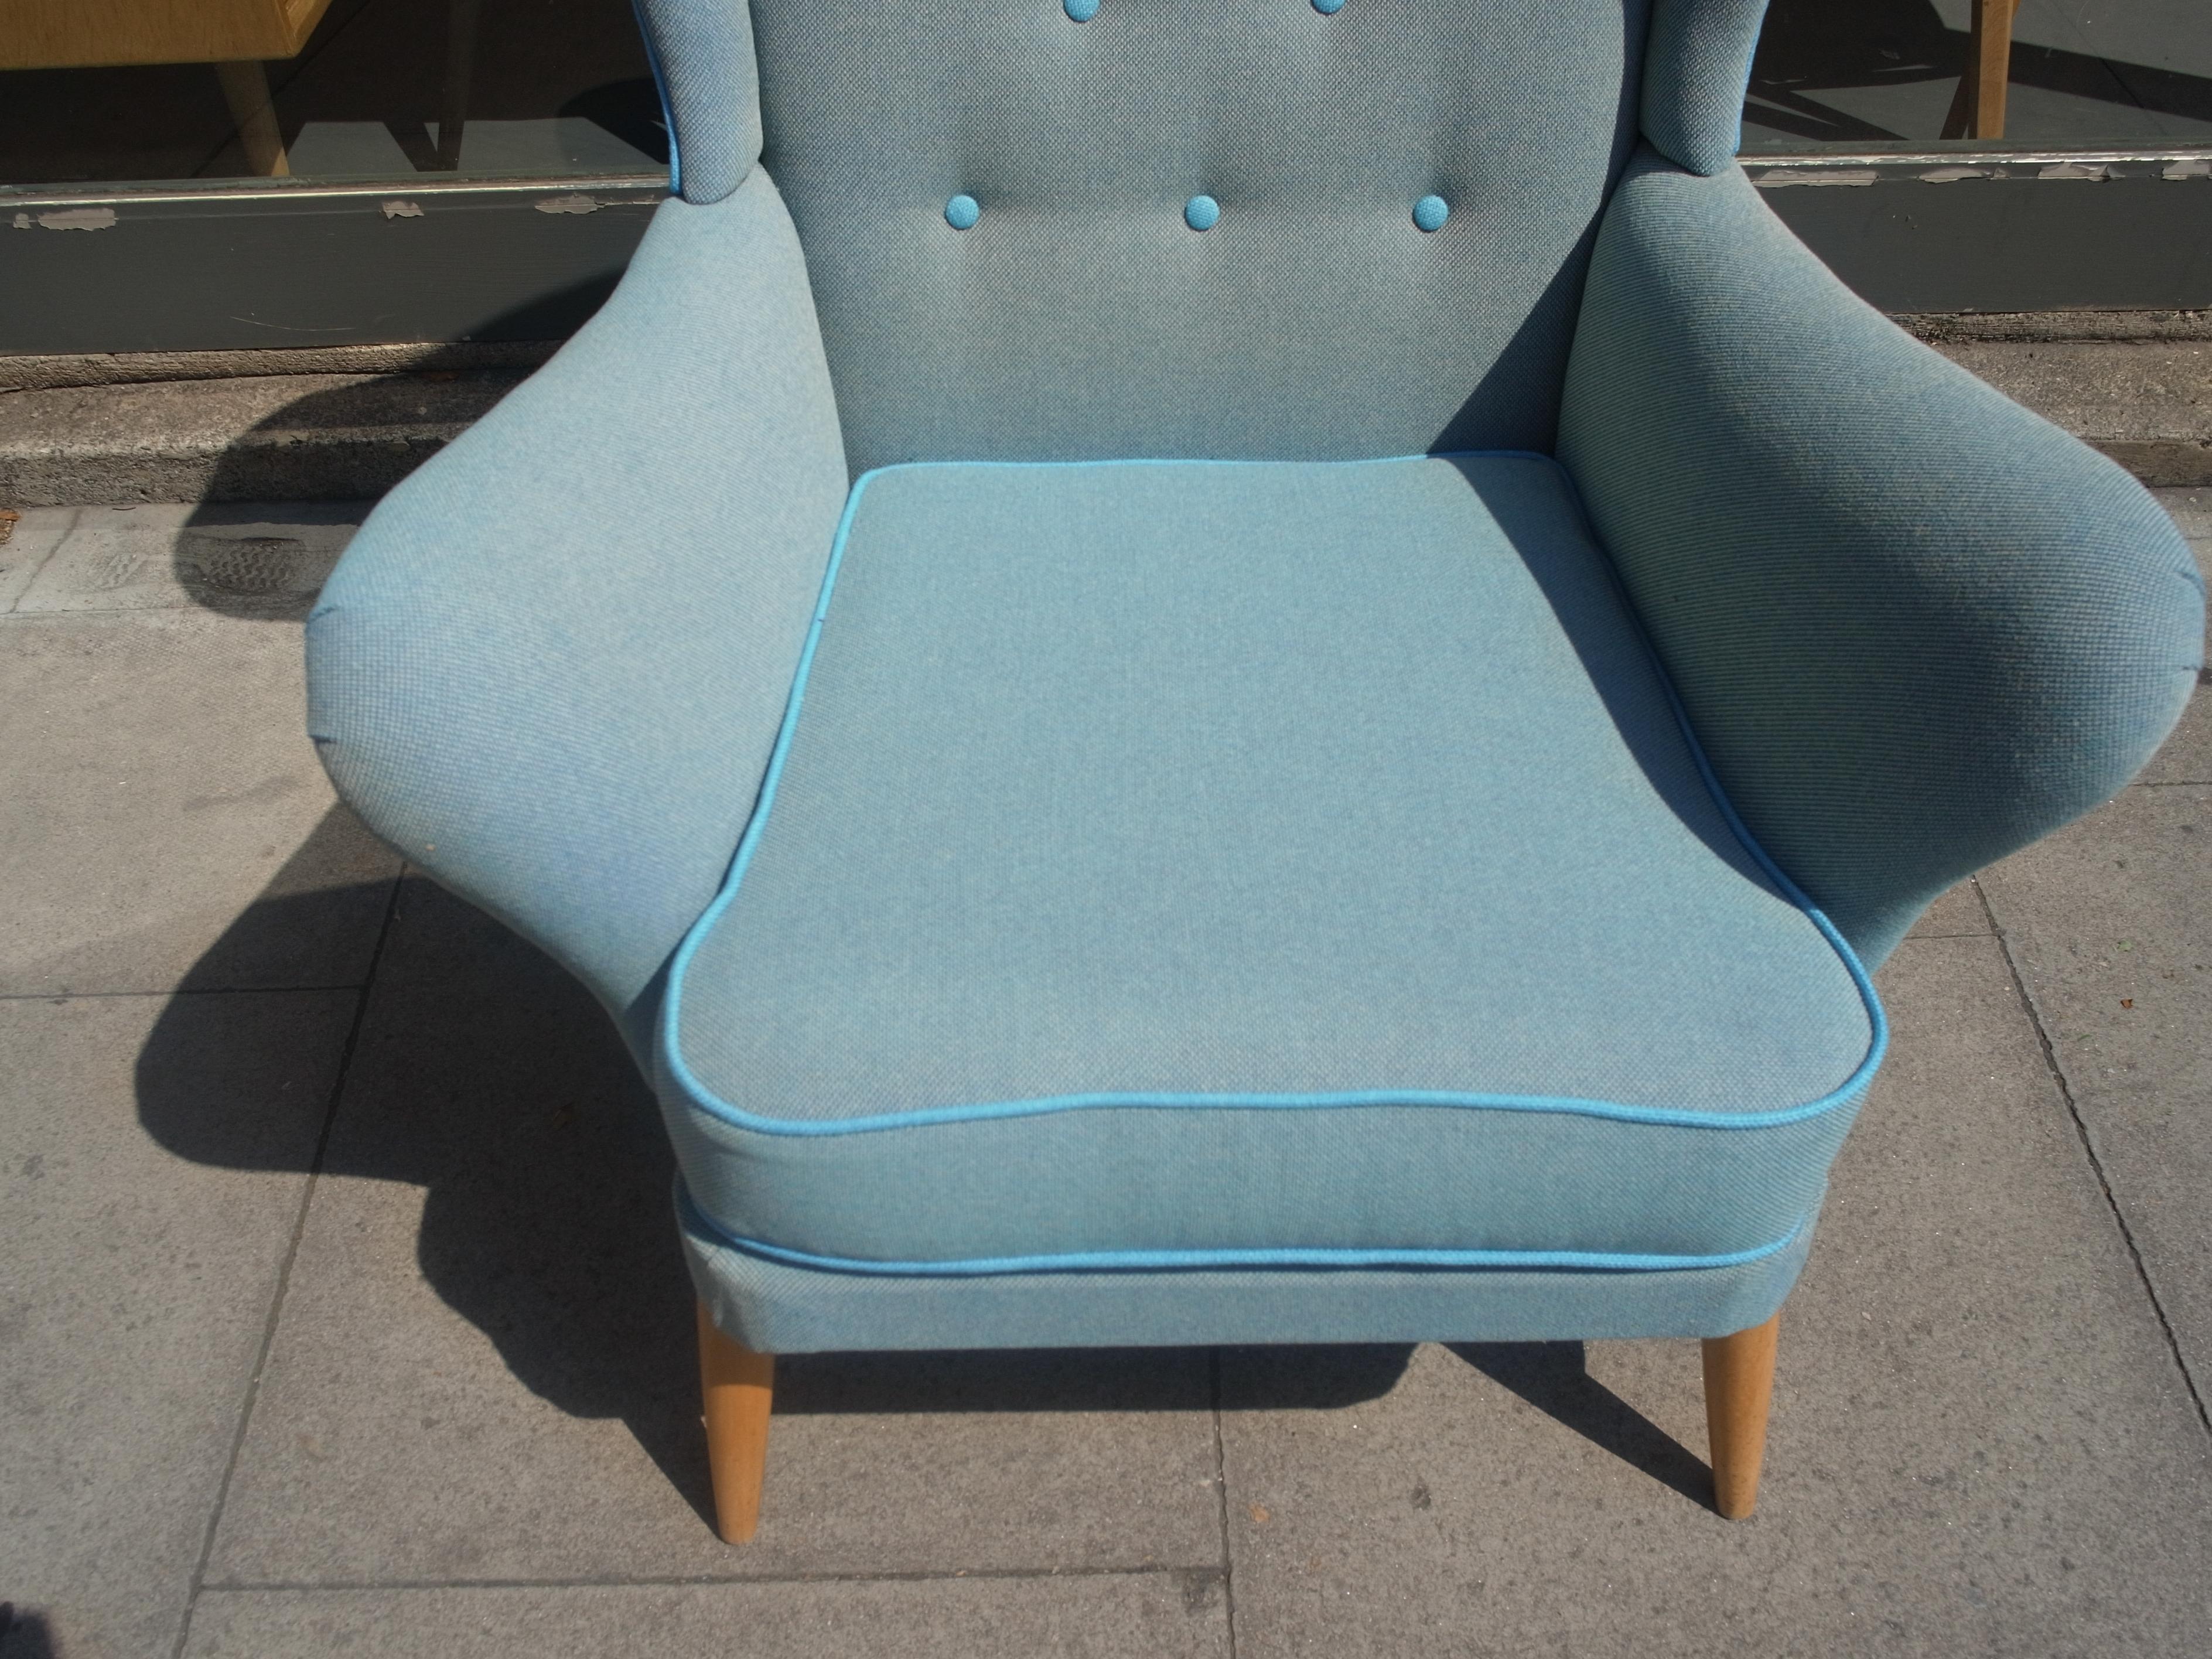 Upholstery Rare Vintage 1950s Ercol Wingback Armchair Upholstered in Blue Wool Textile